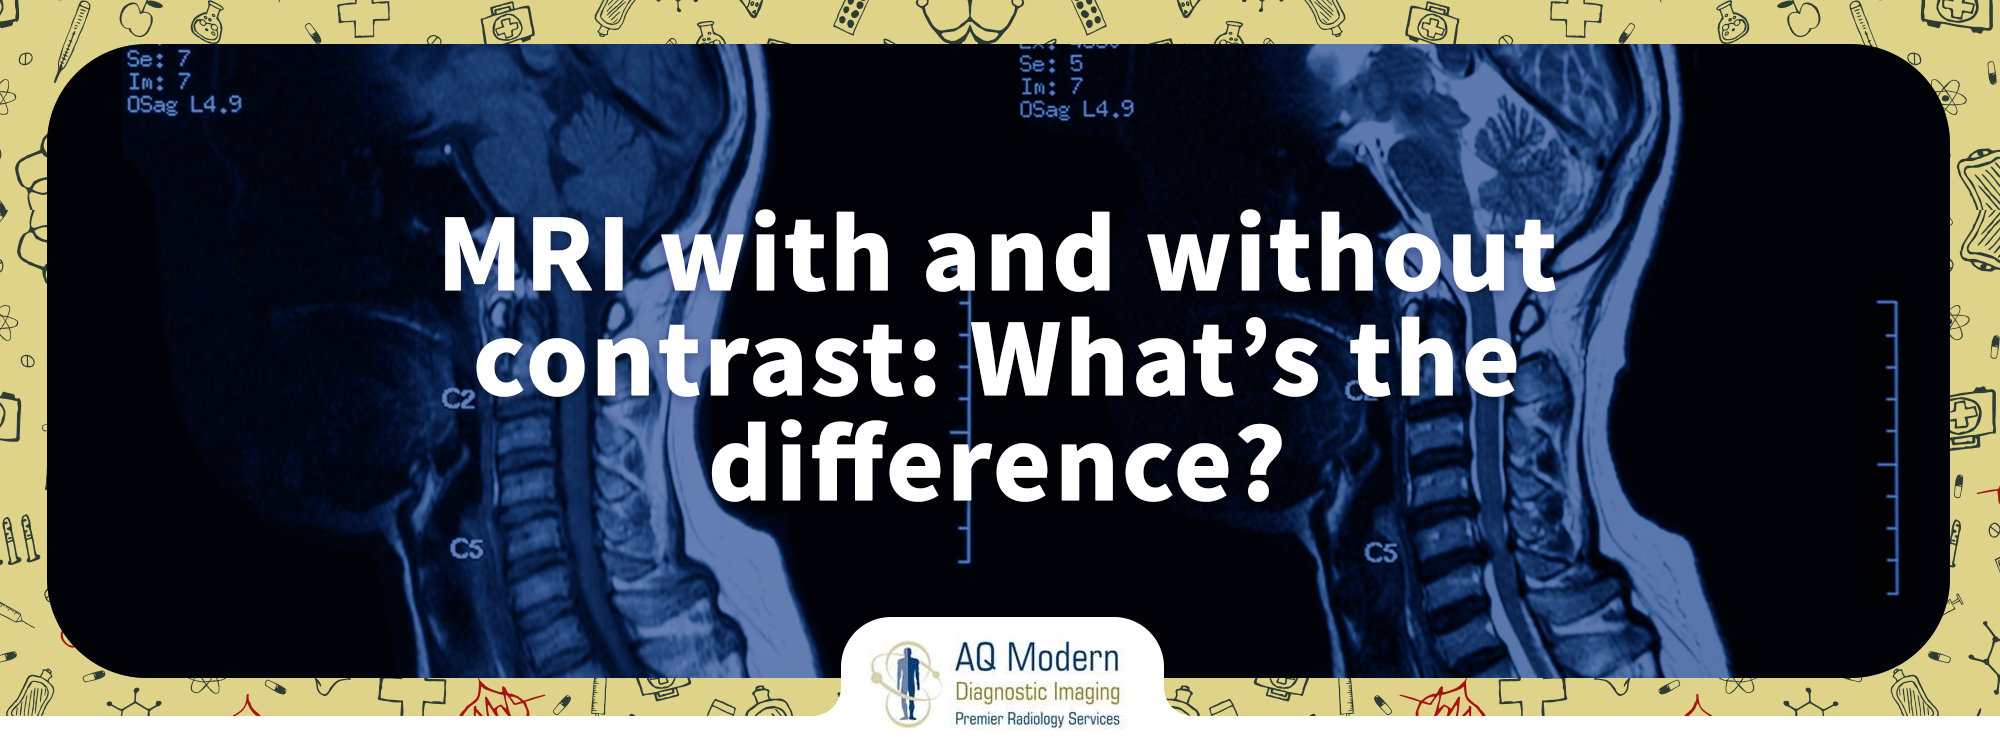 Who should not have an MRI with contrast?